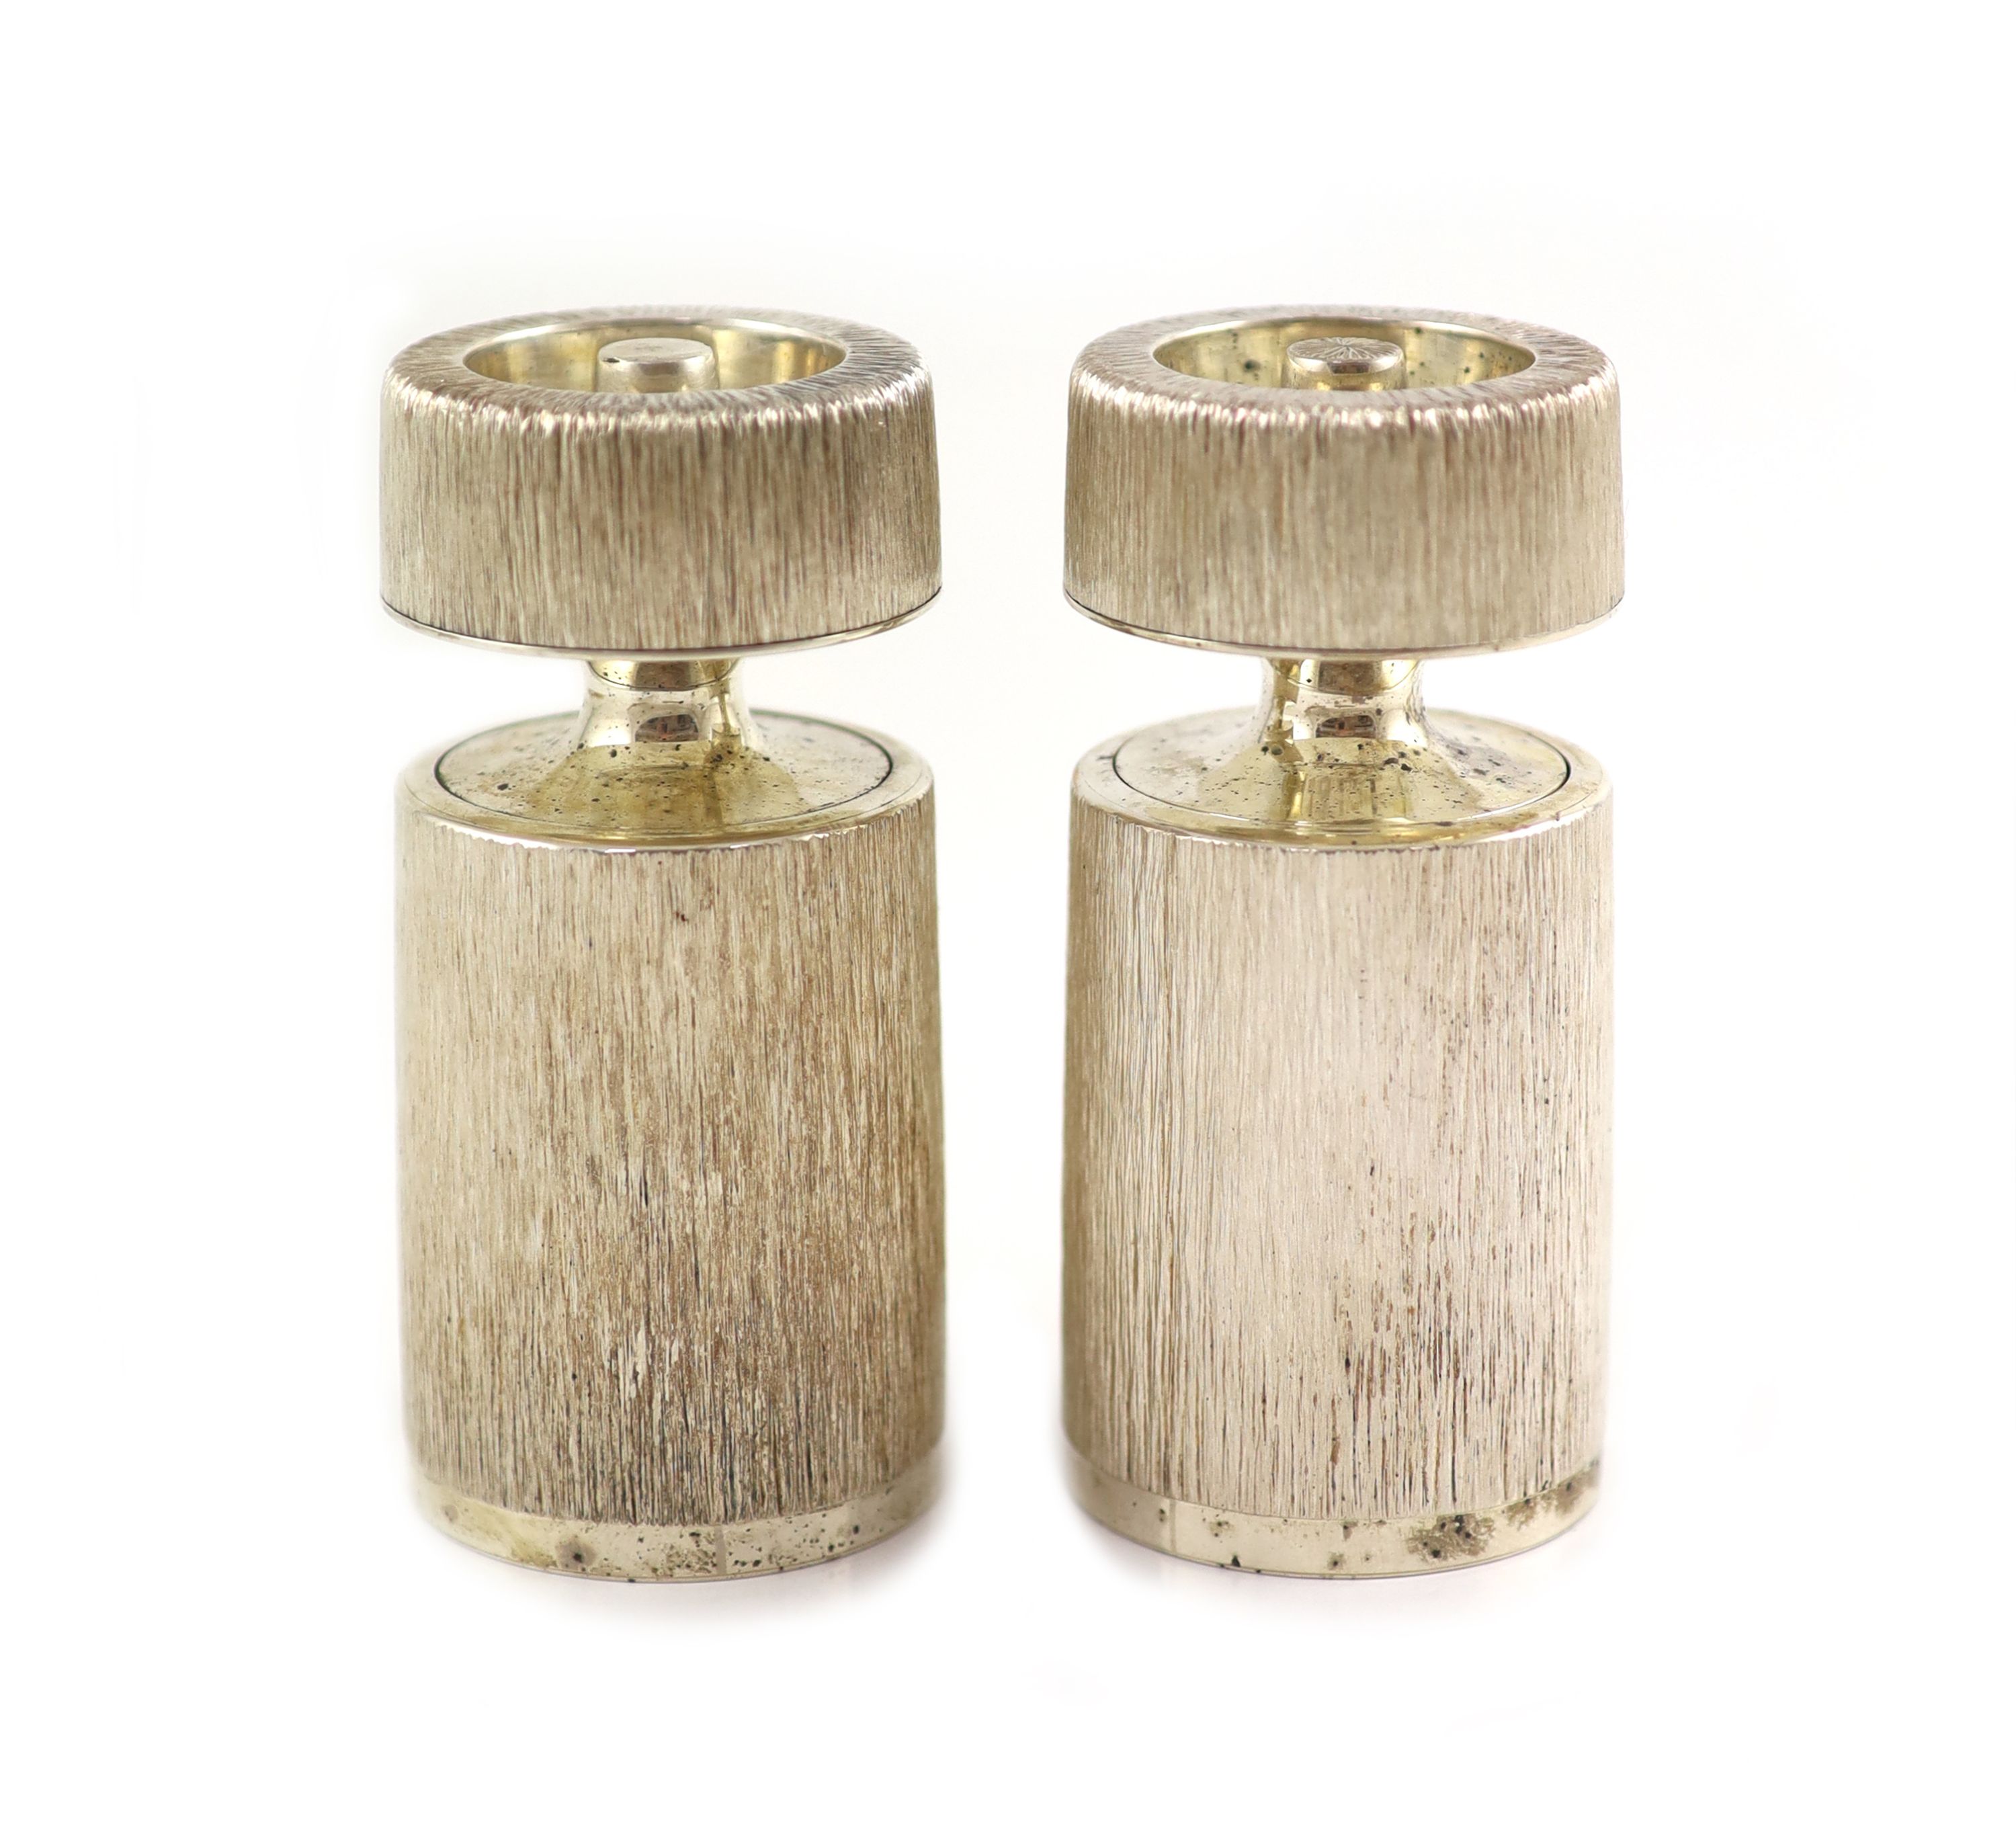 A pair of textured silver salt and pepper mills by Adrian Gerald Benney